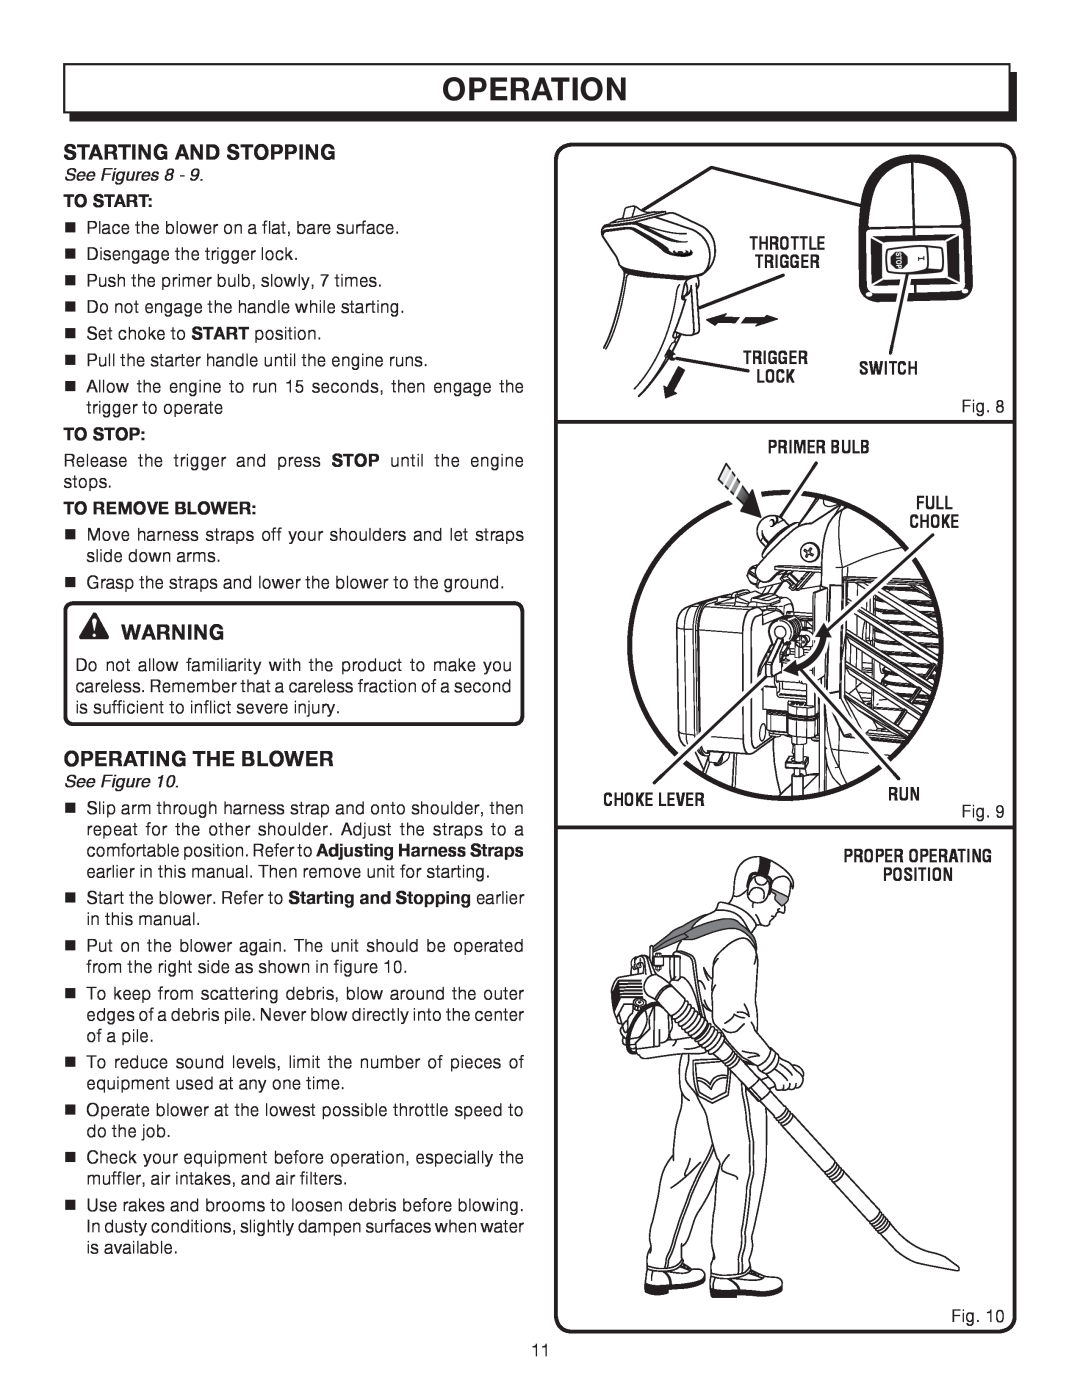 Homelite UT08572A manual Operation, See Figures, To Start, To Stop, To Remove Blower, Throttle Trigger Trigger Switch Lock 